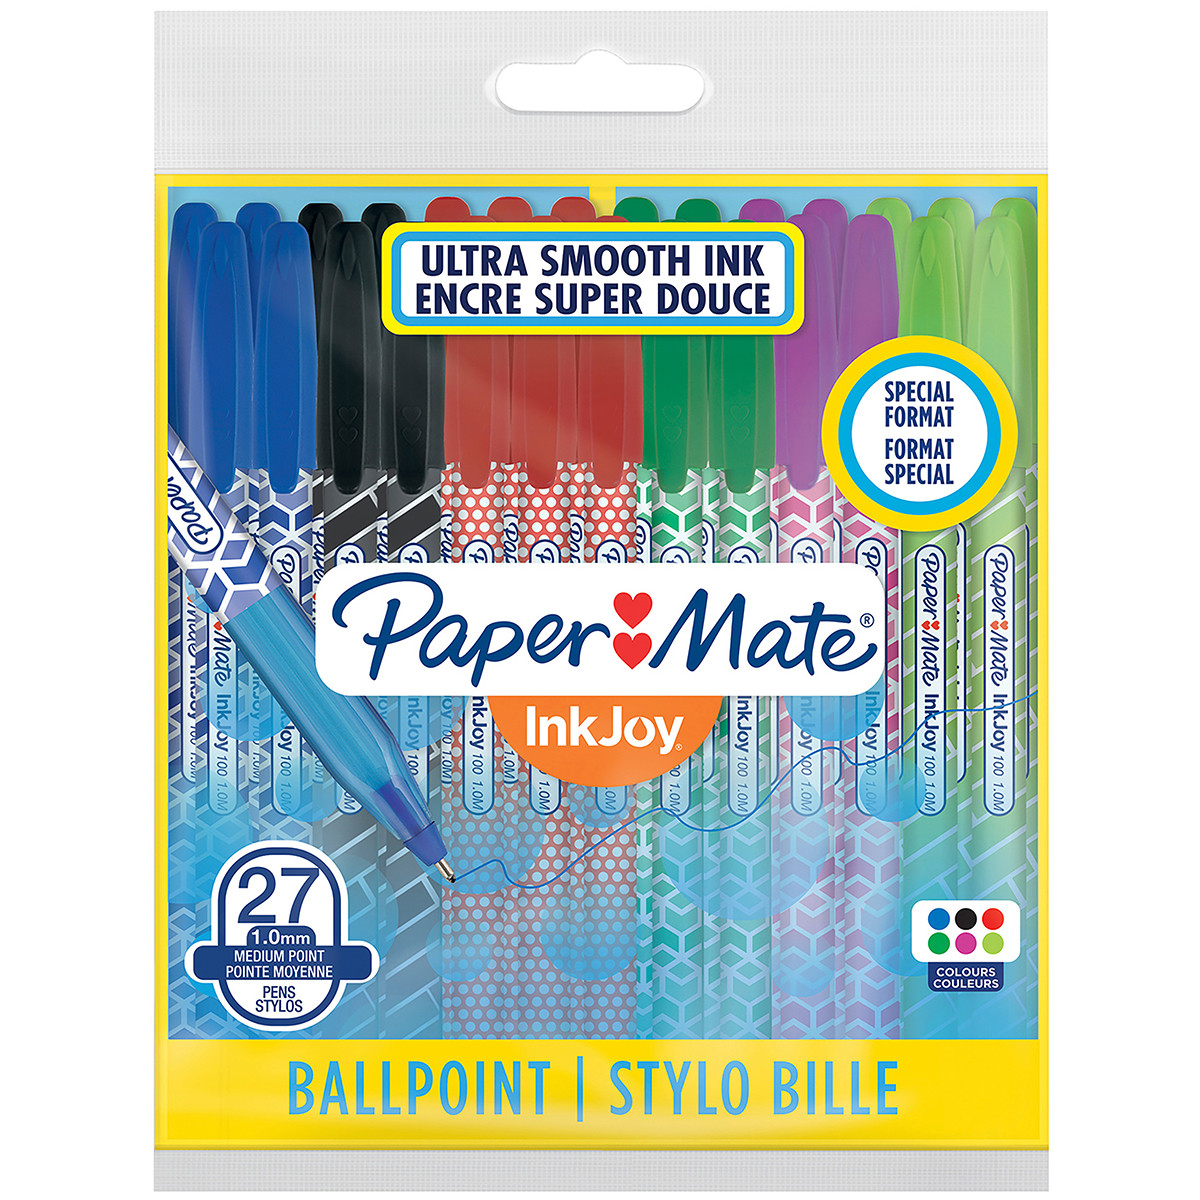 Papermate Inkjoy Wrap 100 Capped Ballpoint Pen - Medium - Fun Colours (Pack of 27)